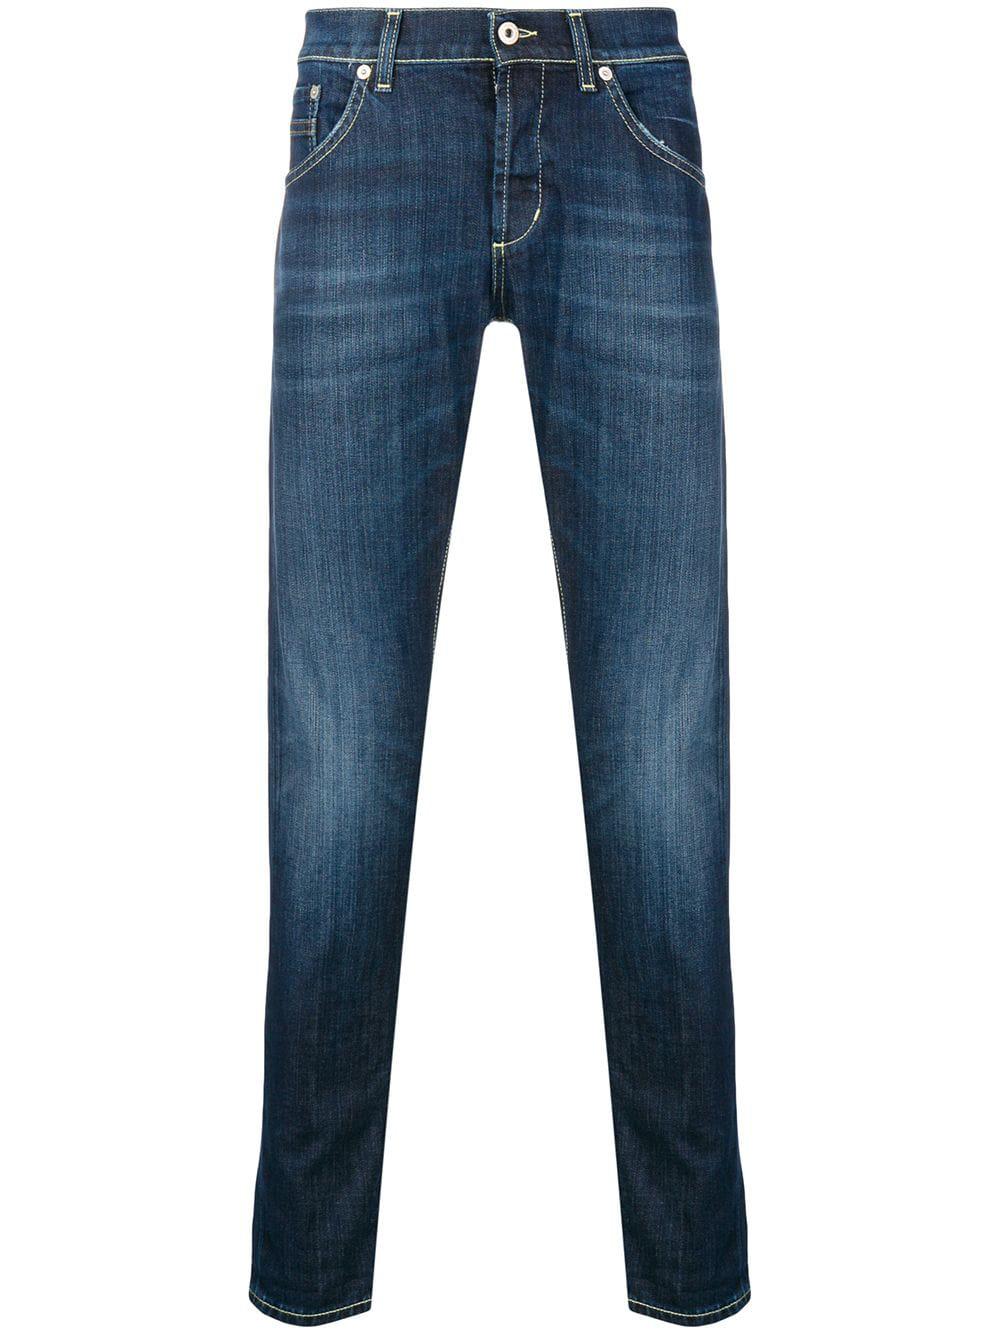 Lyst - Dondup Ritchie Jeans in Blue for Men